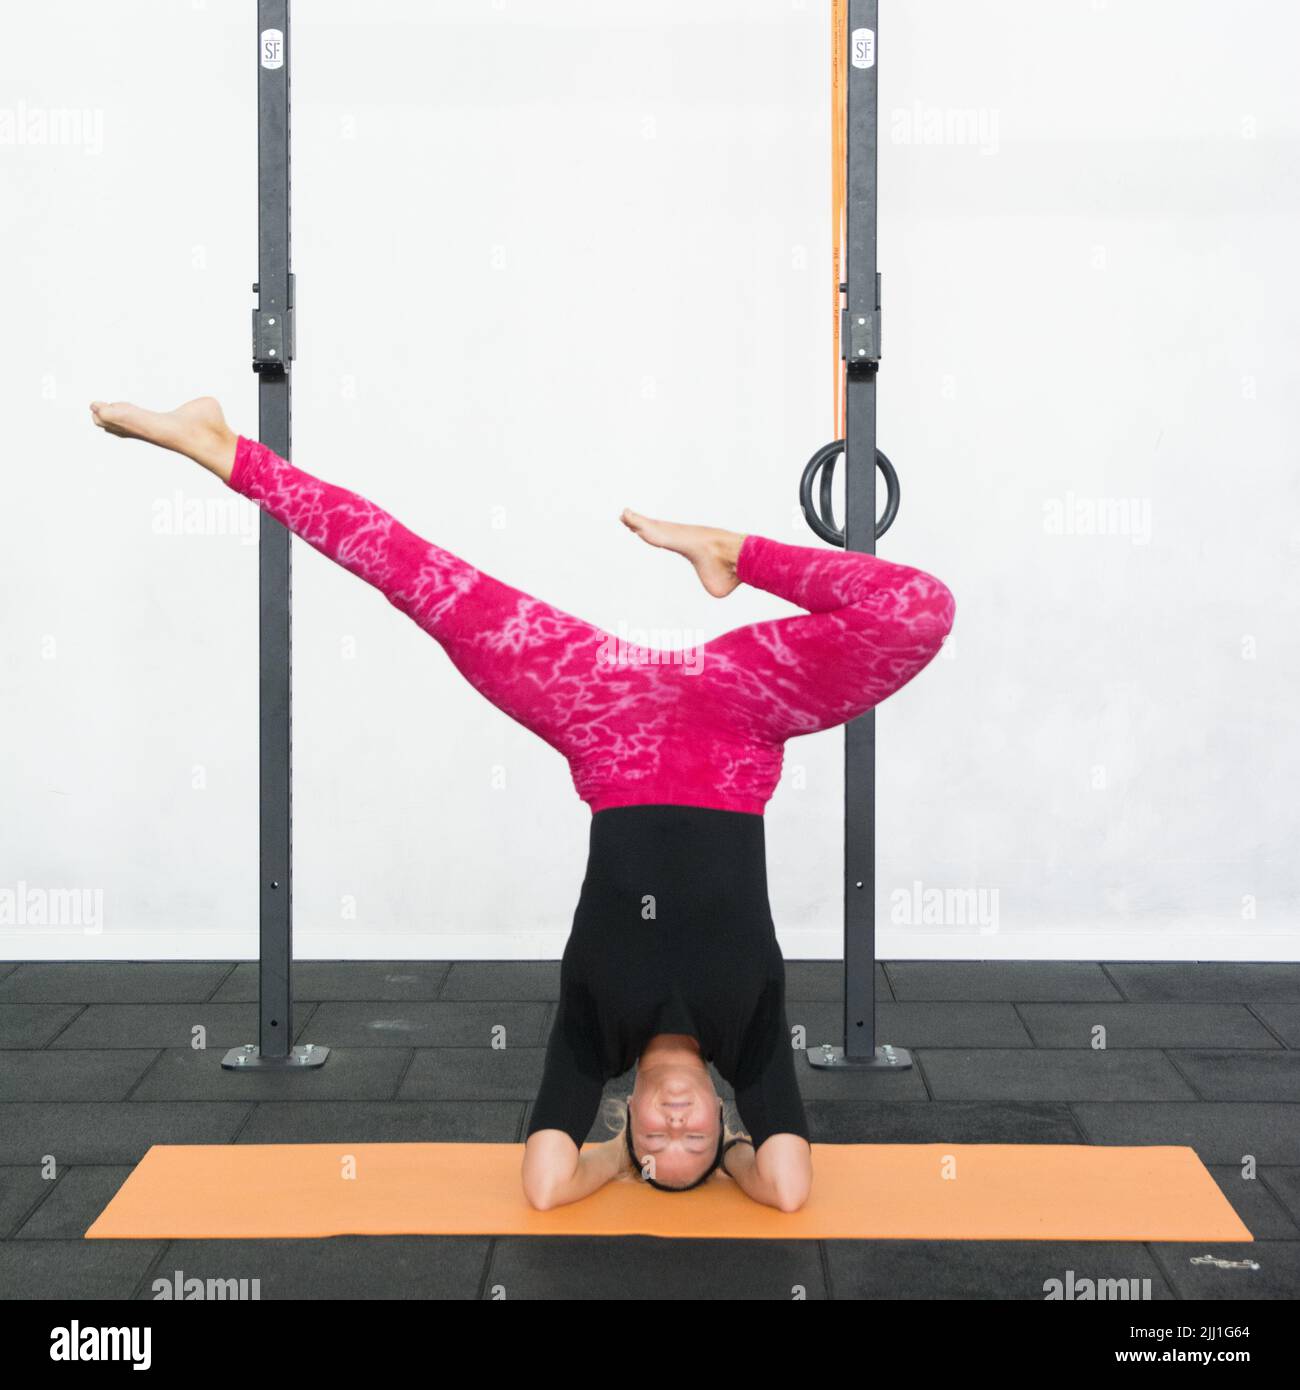 Blonde youth woman performing headstand yoga pose with feet apart but one of the legs bent. Lady wearing pink yoga leggings and black shirt in a gym. Stock Photo